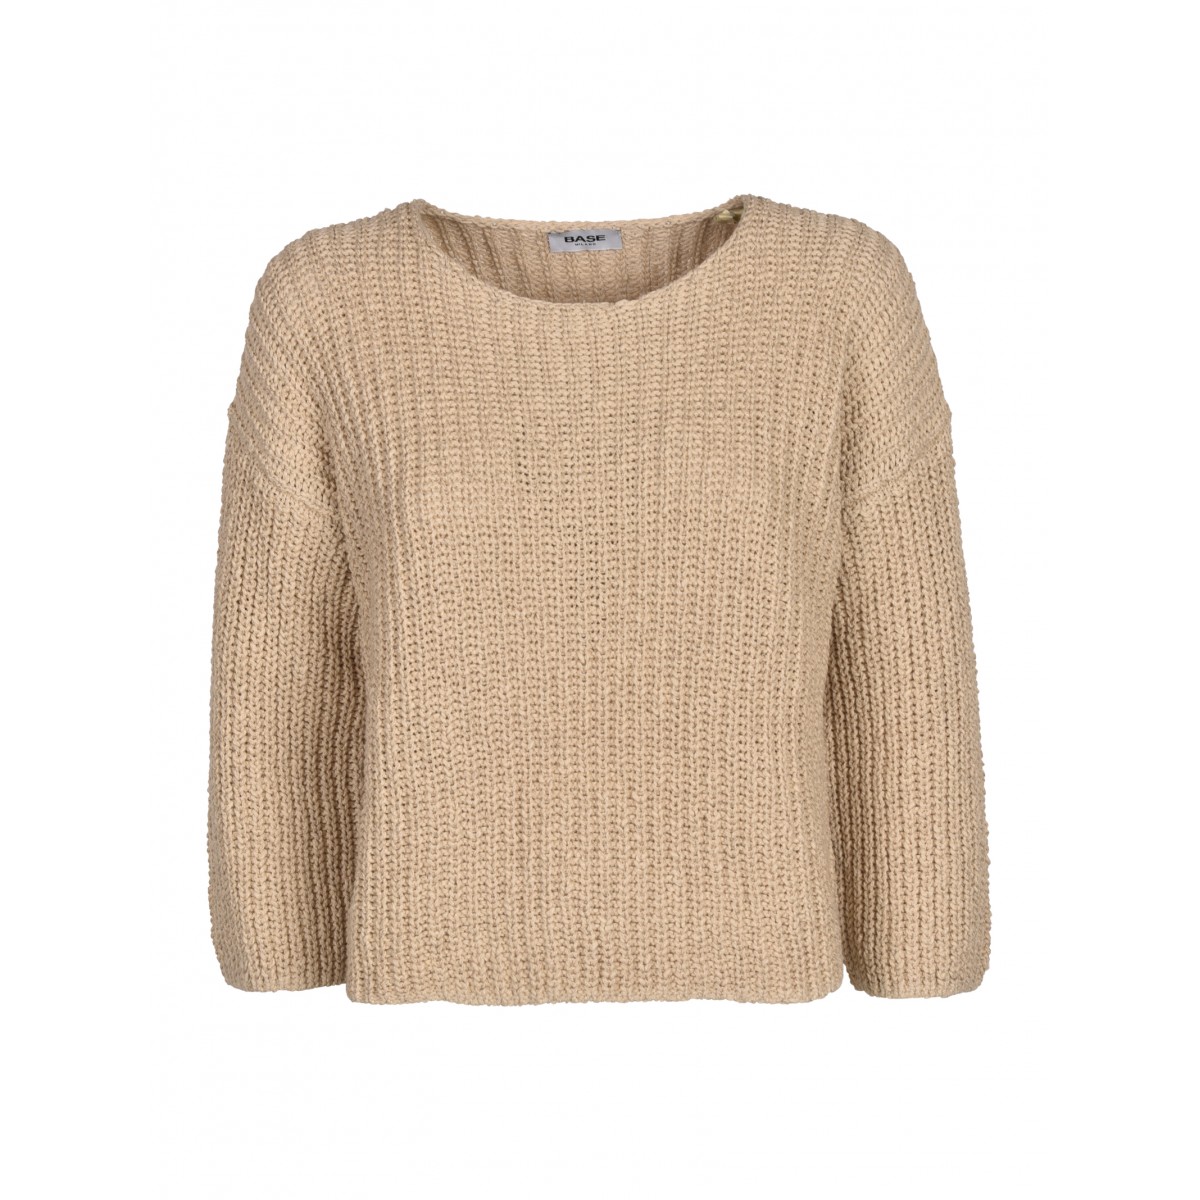 Beige Cotton and Linen Sweater